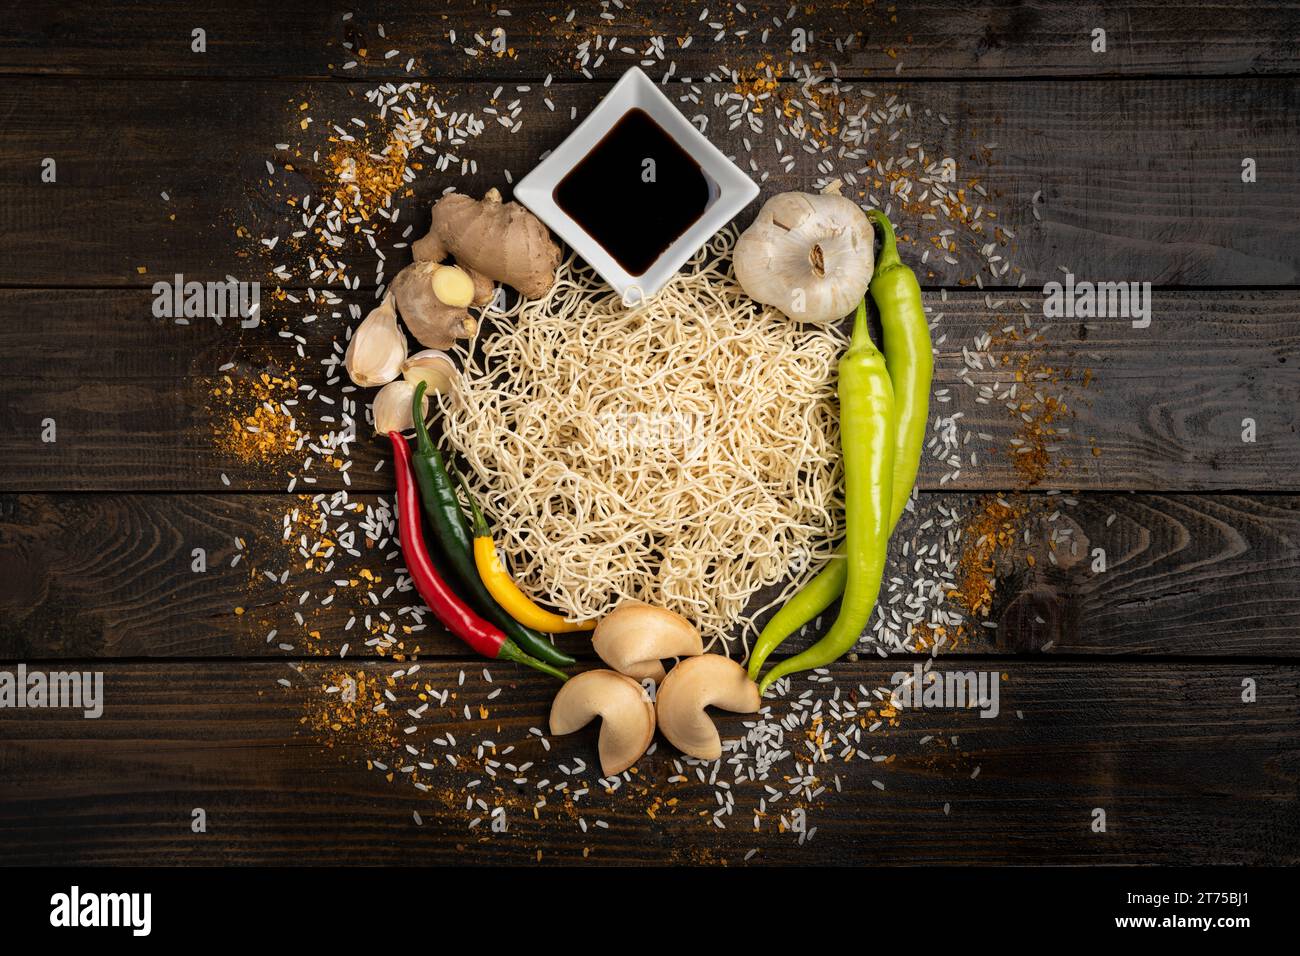 Chinese food ingredients, noodles, hot peppers, fresh ginger, soy sauce, garlic, rice, spices, and fortune cookies on a wooden background Stock Photo